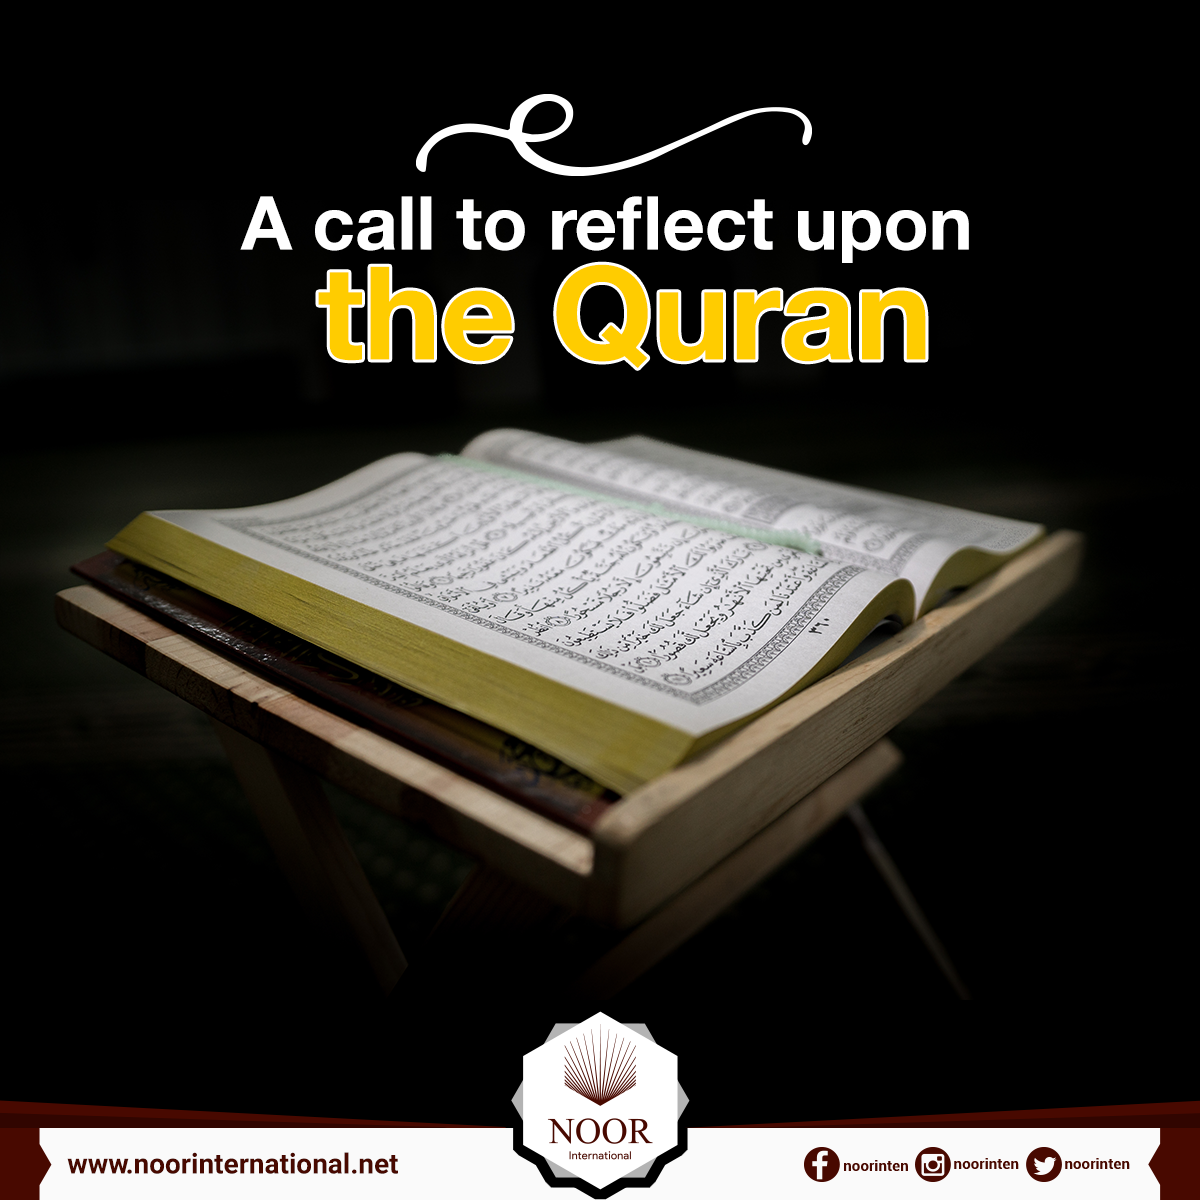 A call to reflect upon the Quran